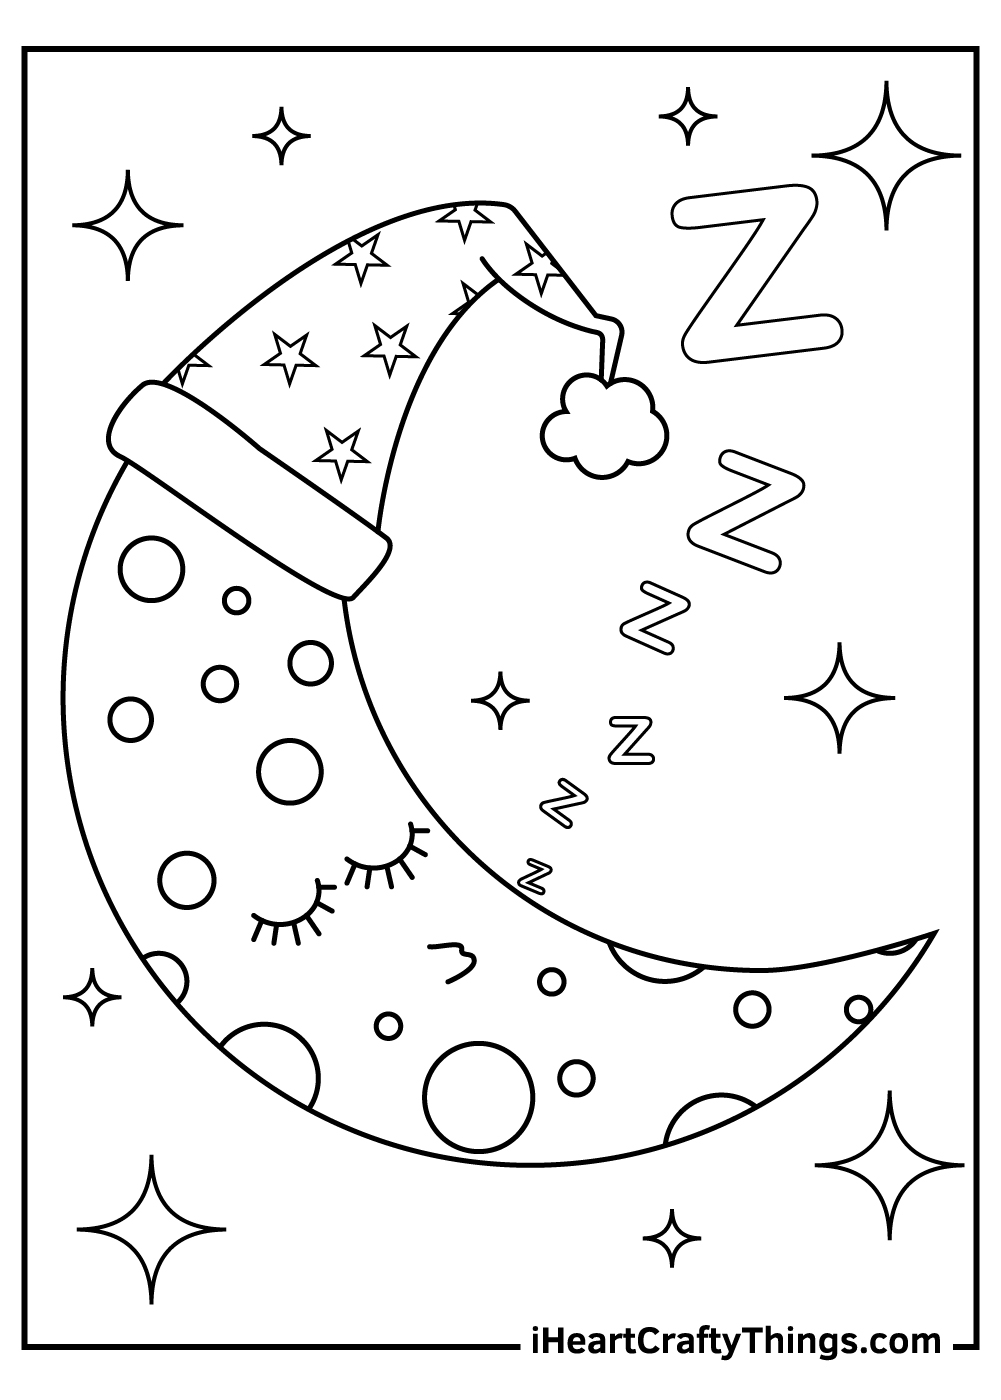 Printable Moon Coloring Pages (Updated 2021)